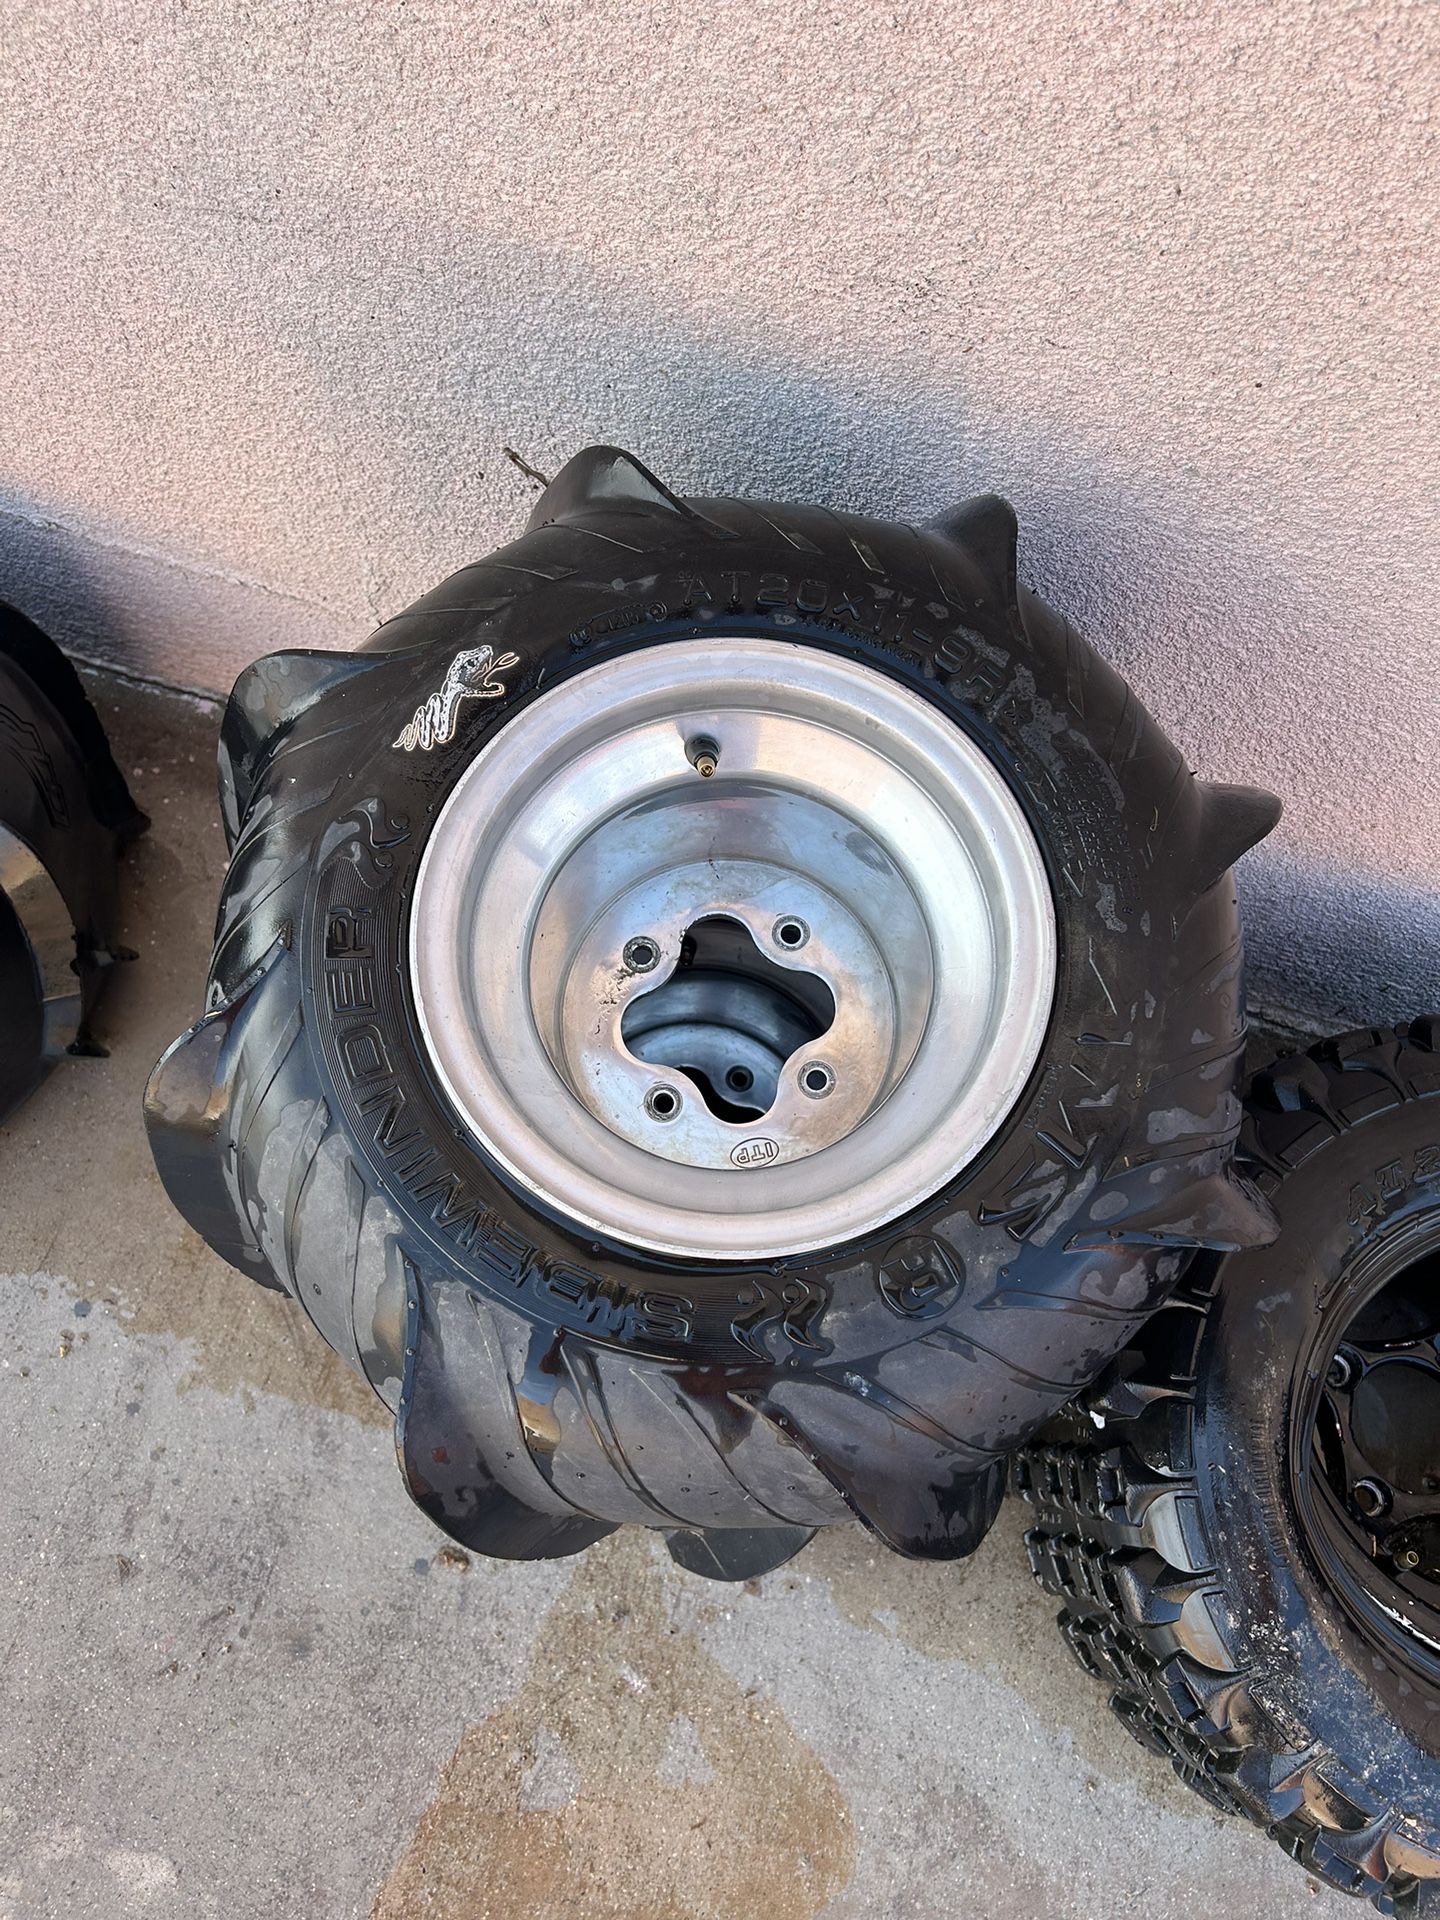 Atv Wheels And Tires